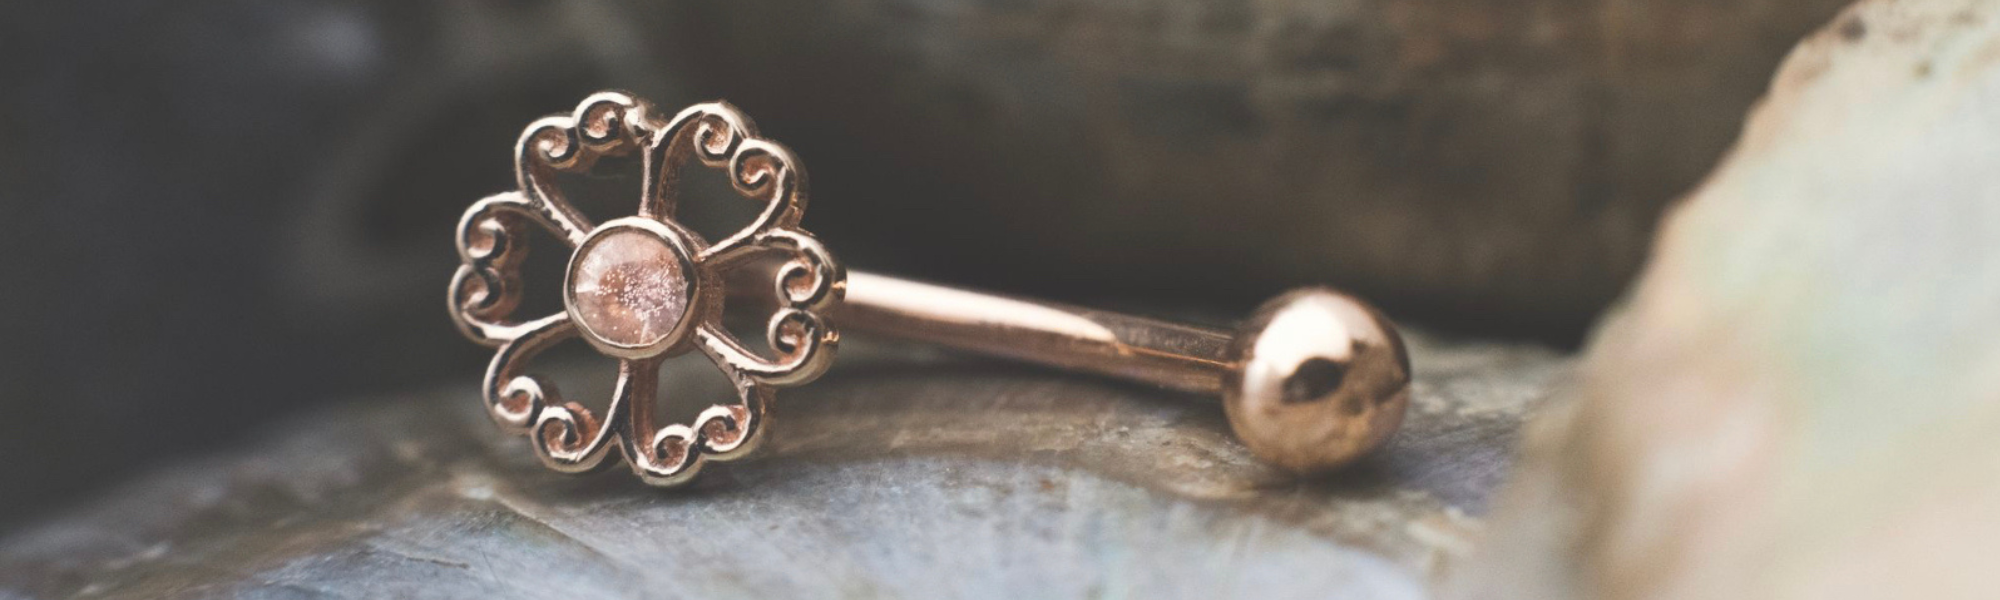 Incense Curved Barbell 16g 5/16" with Oregon Sunstone & Plain Bead Top in 14k Rose Gold by BVLA